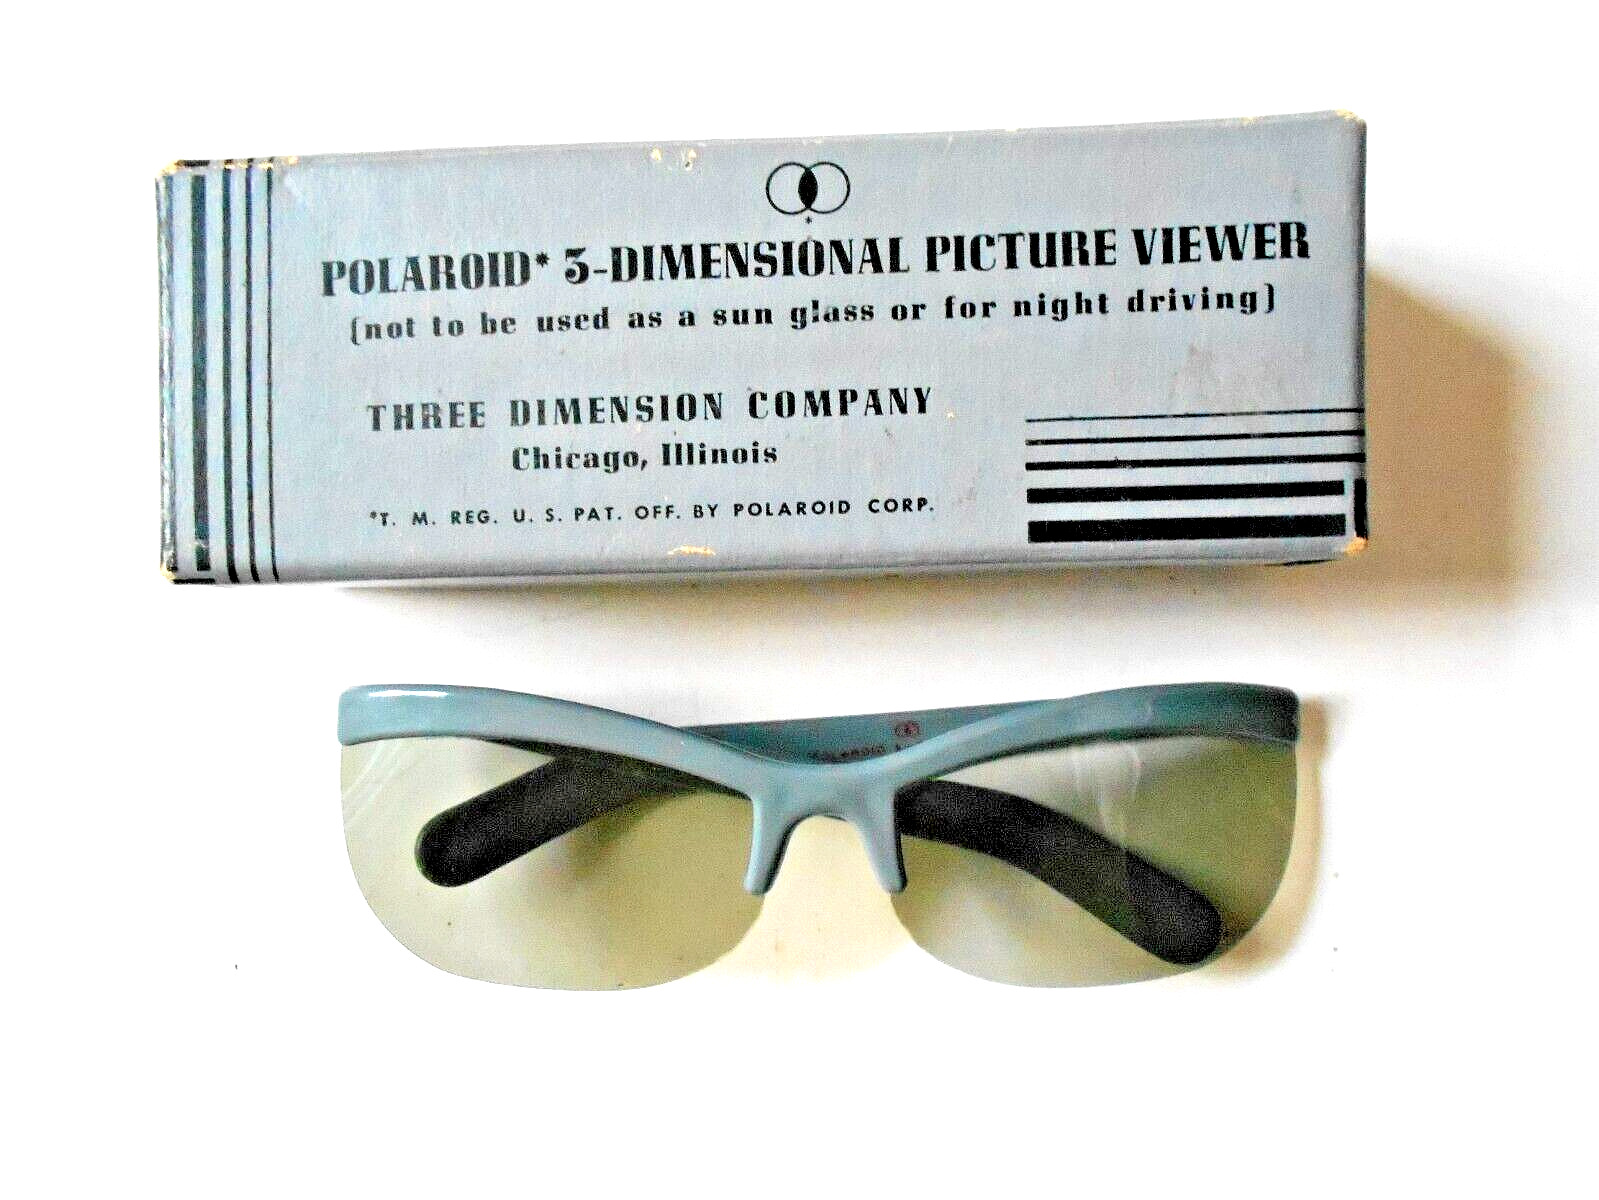 Vintage Polaroid 3-Dimensional Picture Viewer Glasses in box